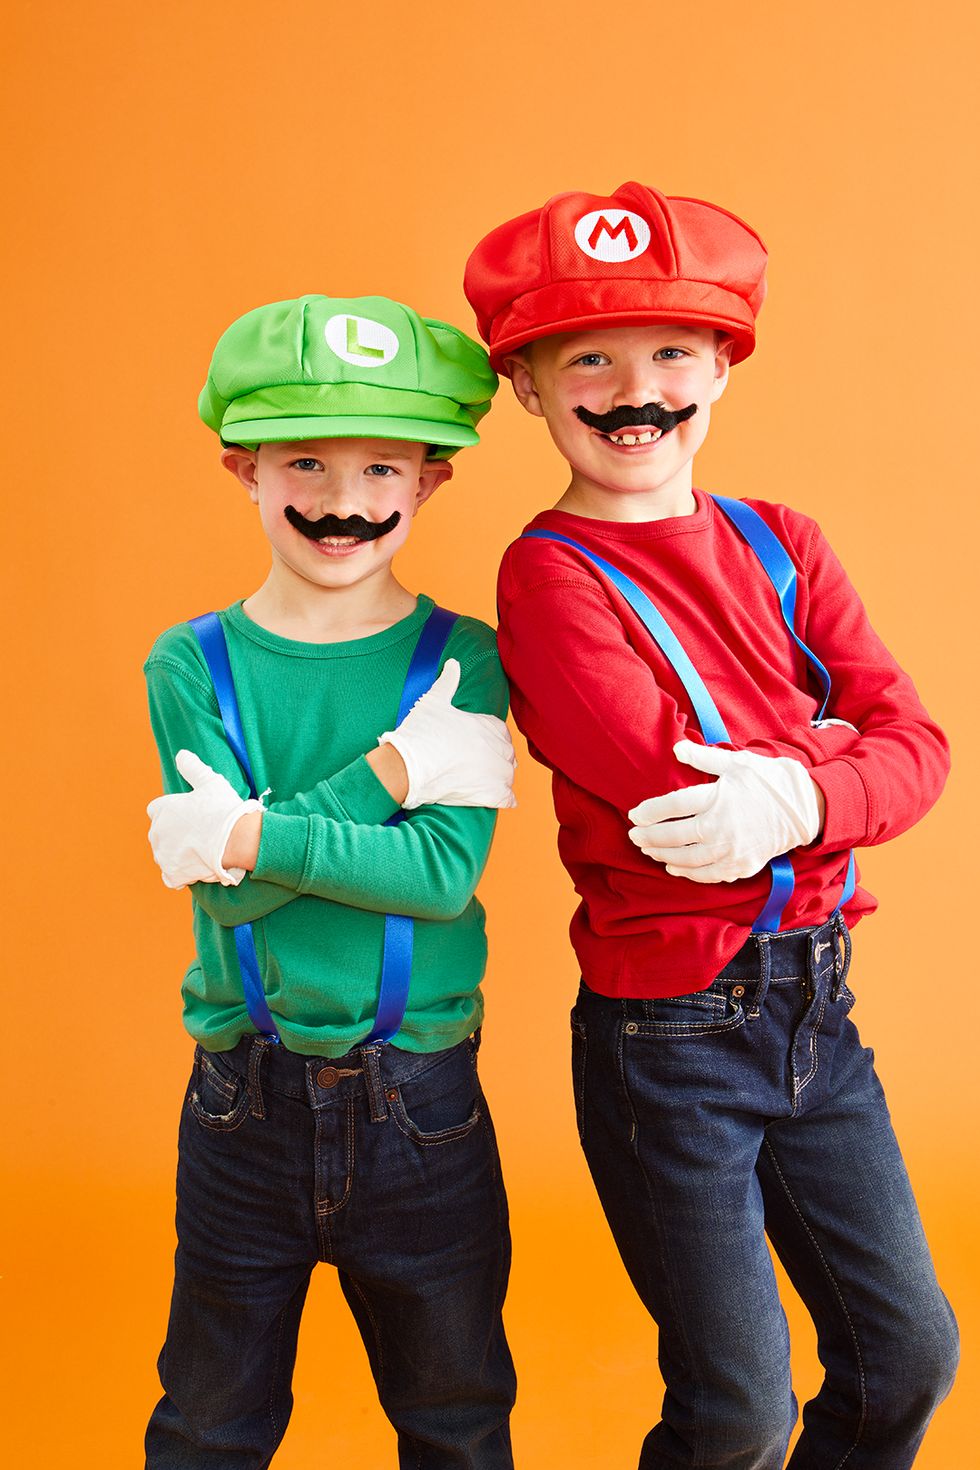 10 Halloween Costumes That Are So Easy Even Your Kids Can Make Them